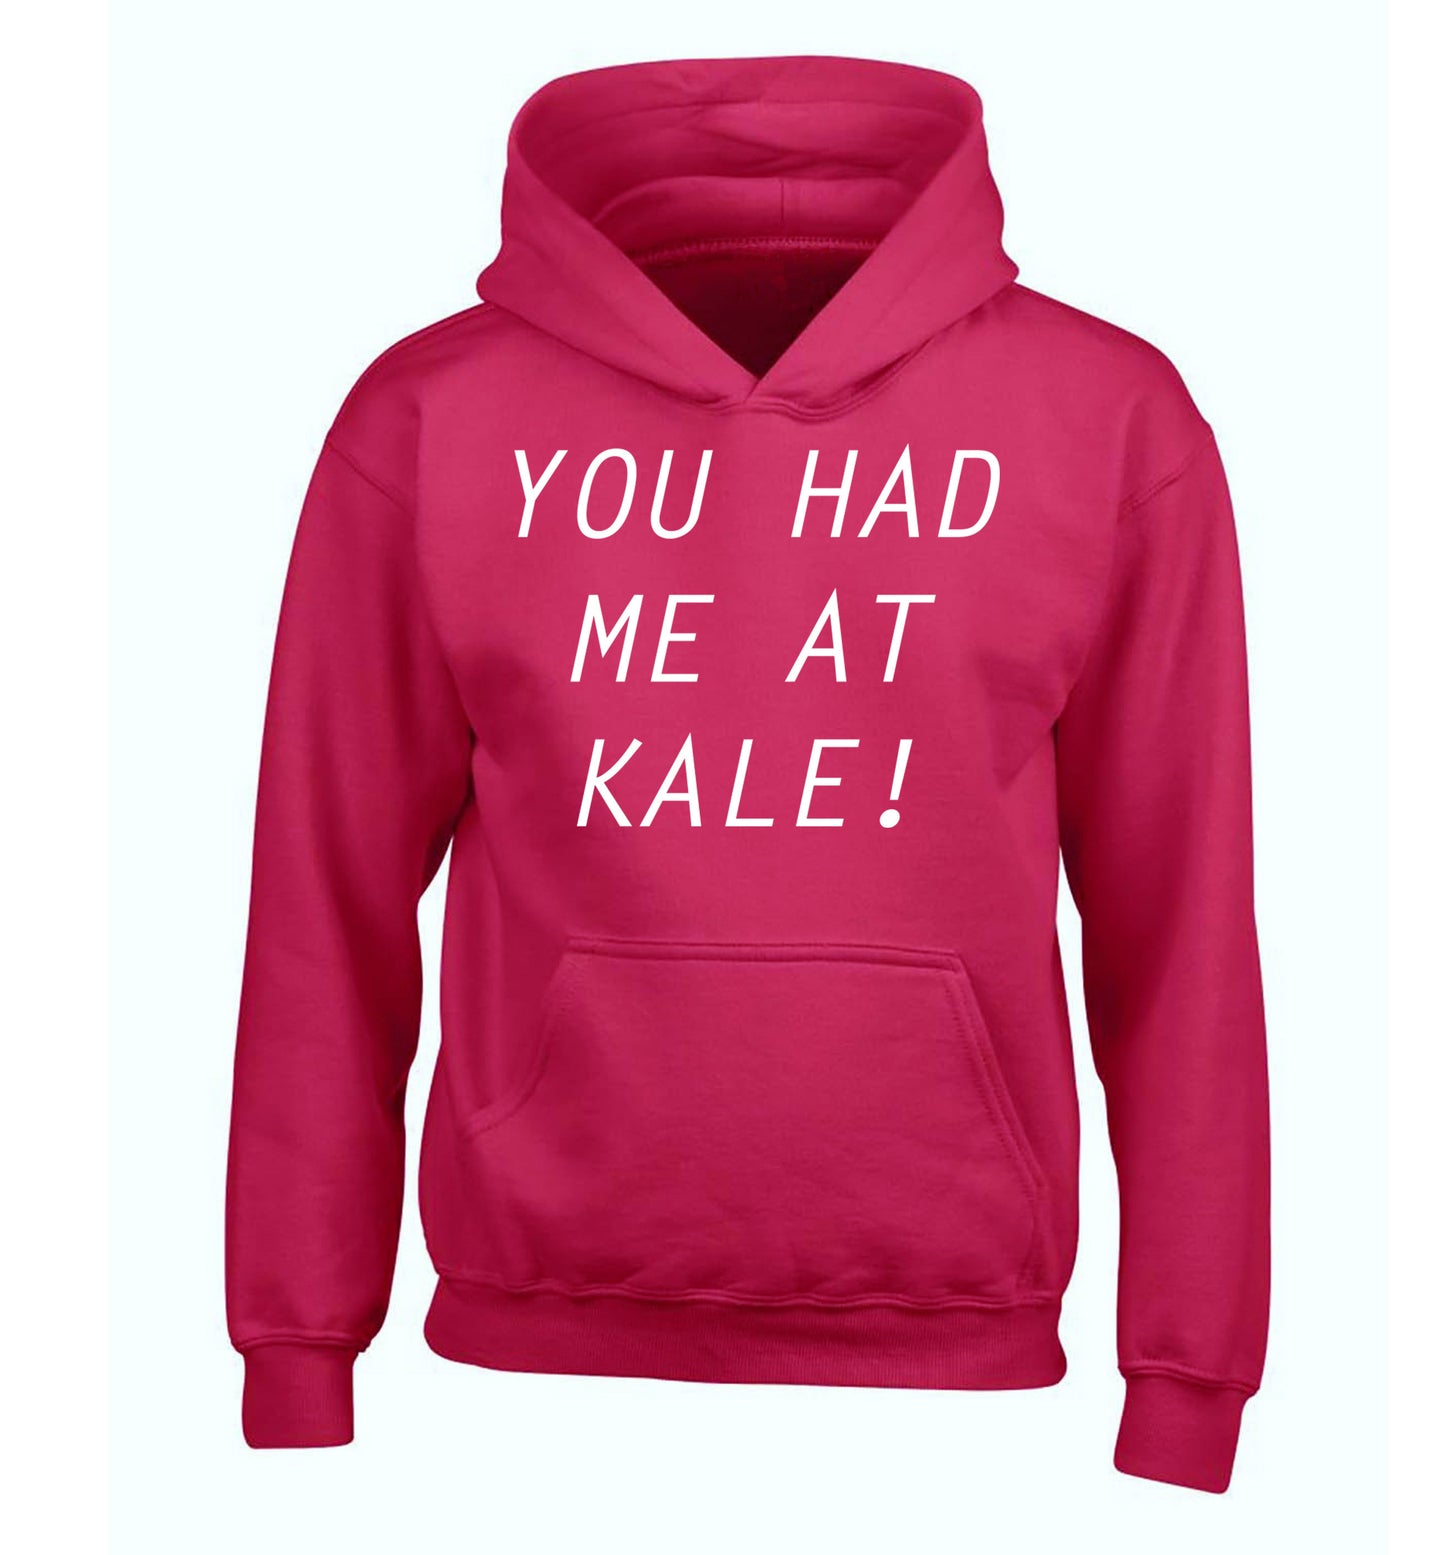 You had me at kale children's pink hoodie 12-14 Years